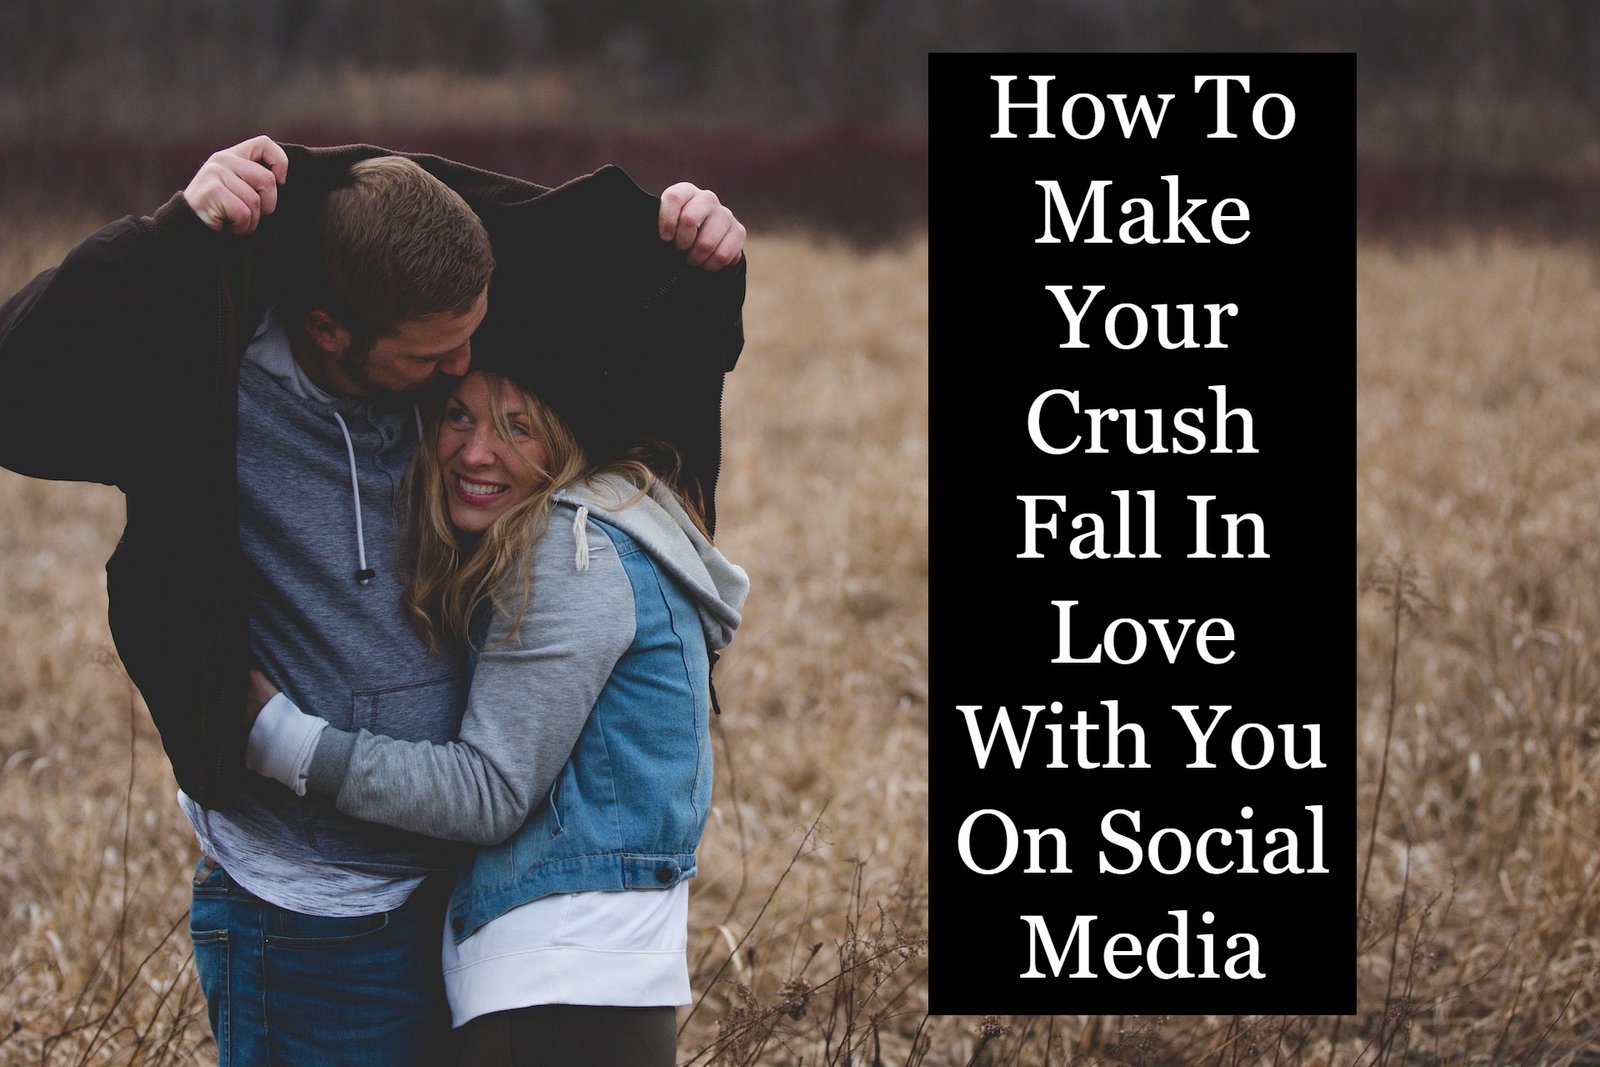 How To Make Your Crush Fall In Love With You On Social Media